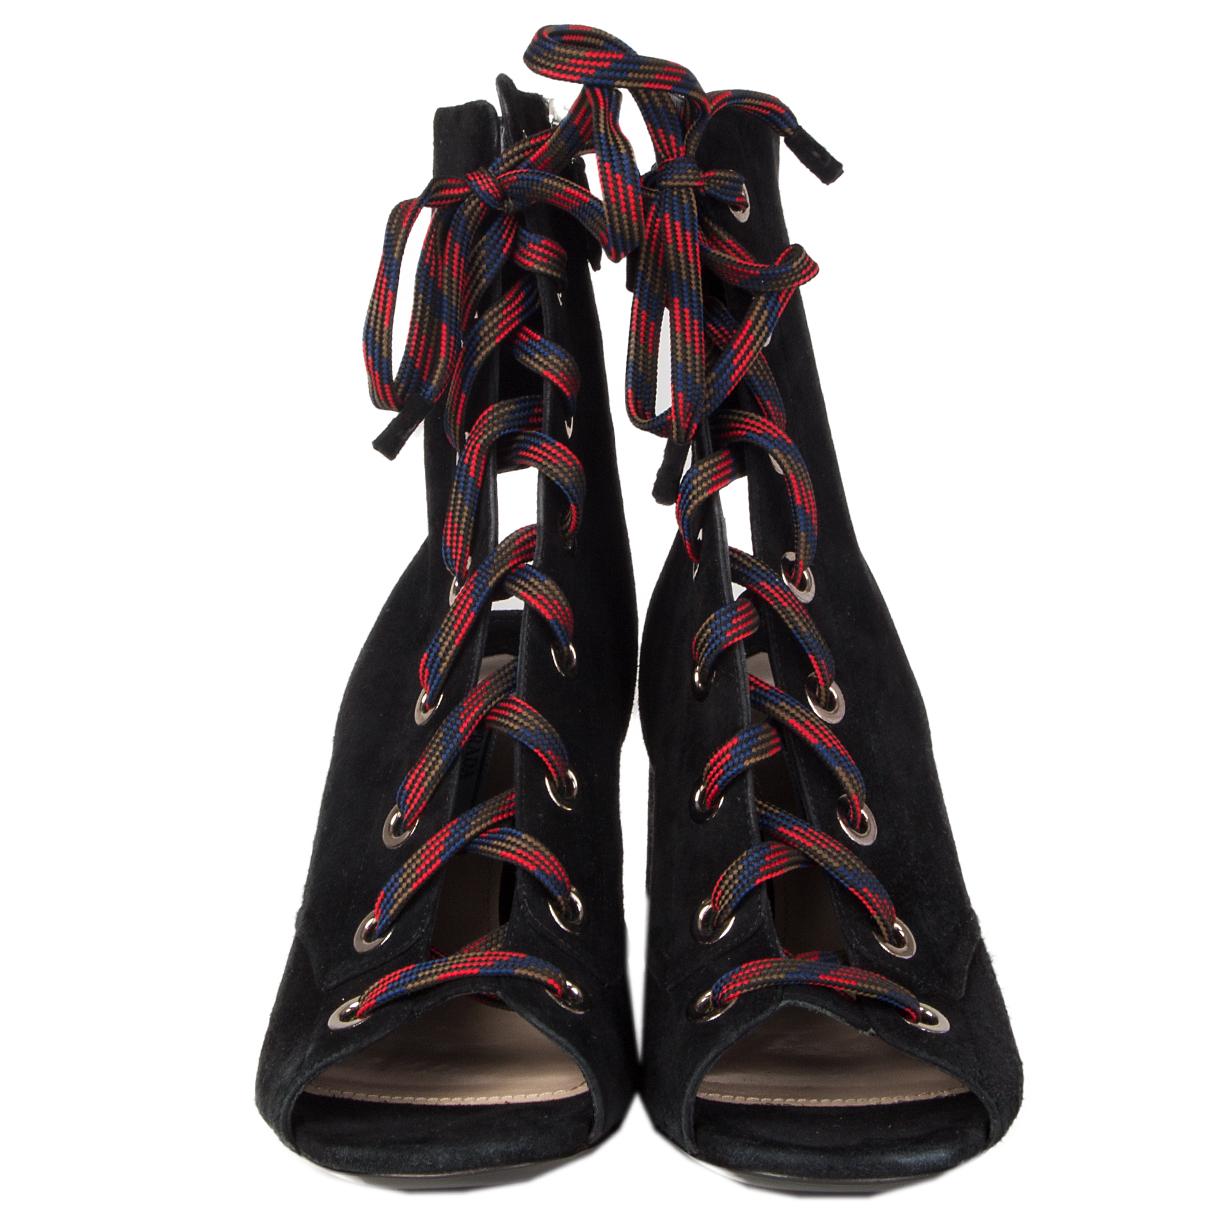 100% authentic Prada lace-up ankle-boots in black suede featuring red, blue, olive green and black striped laces, silver-tone eyelets and gold-tone metal plate on heel. Open with a zipper on the inside. Brand new.

Measurements
Imprinted